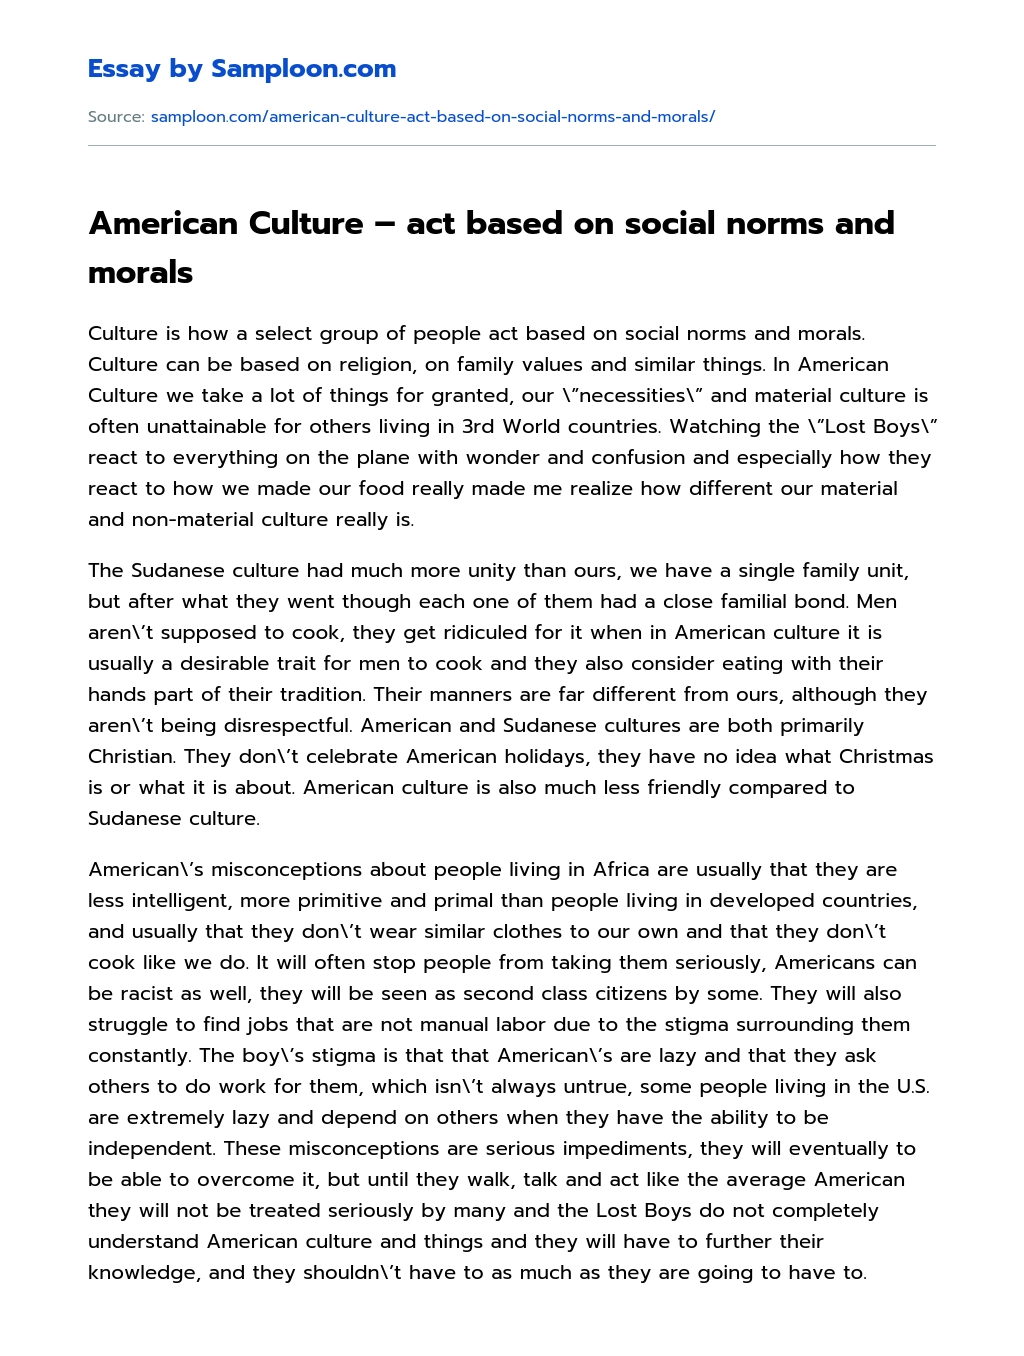 American Culture – act based on social norms and morals essay